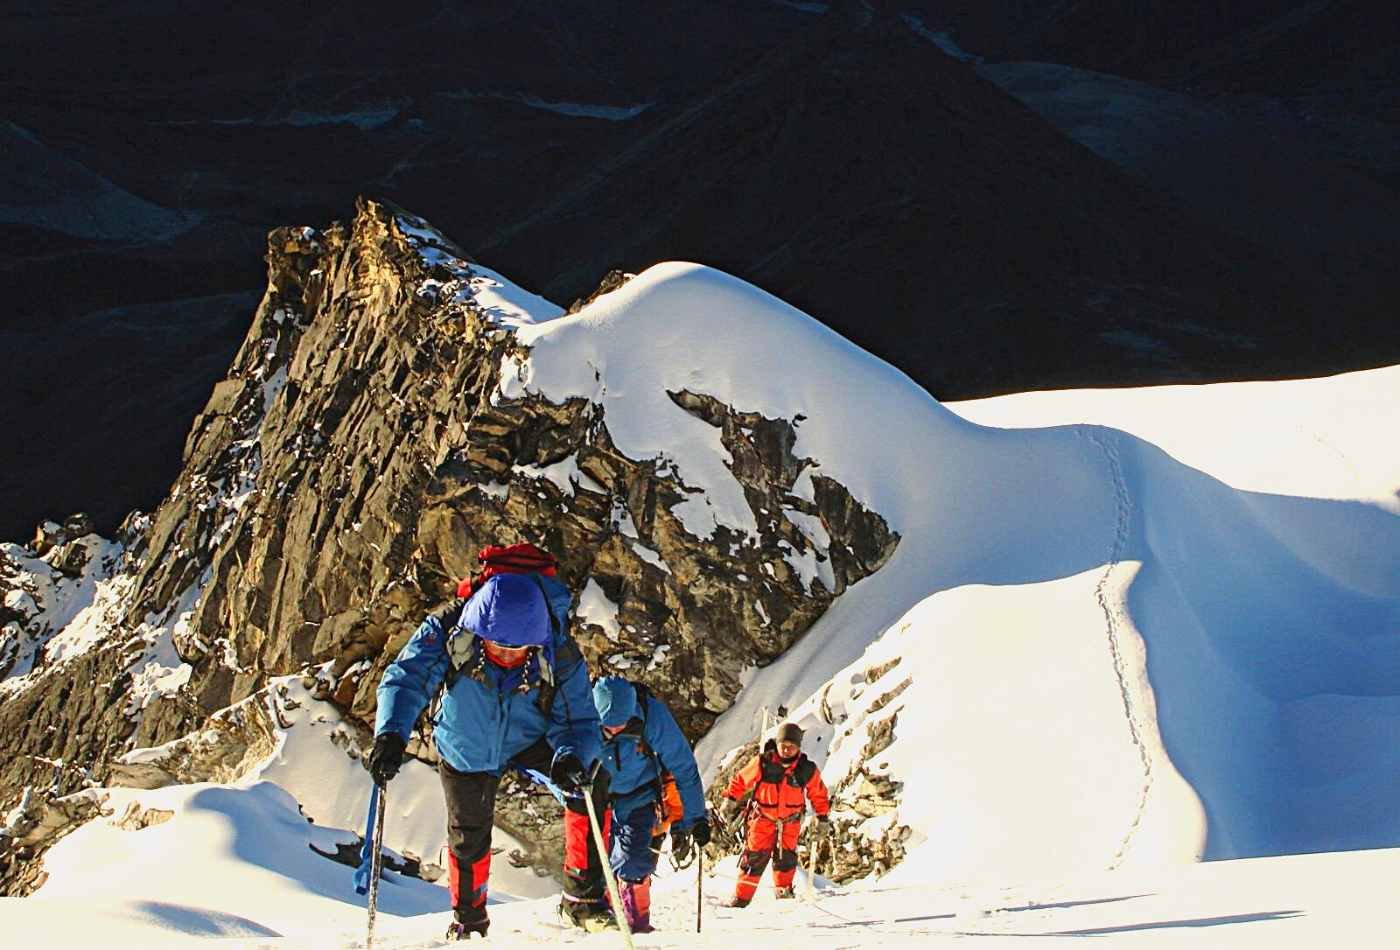 A group of determined climbers making their way up the steep slope of Labuche peak in the early morning light.